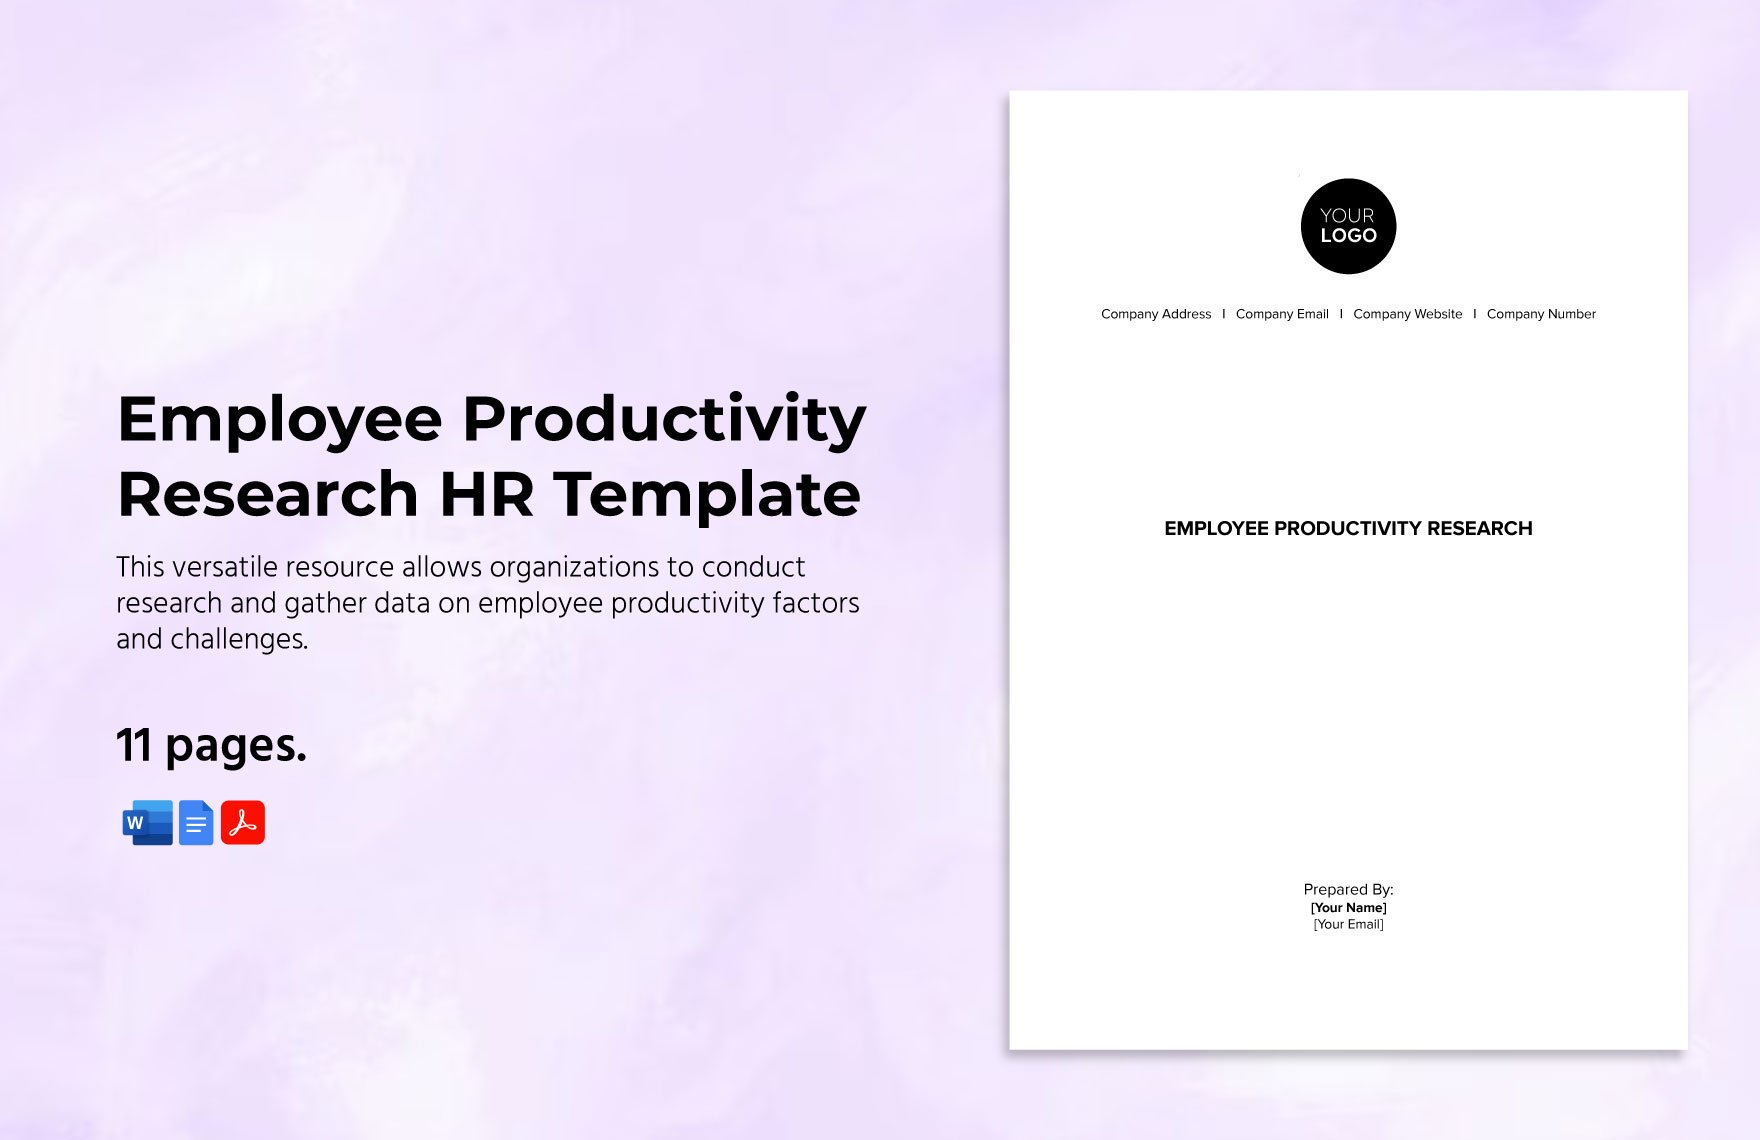 Employee Productivity Research HR Template in Word, Google Docs, PDF